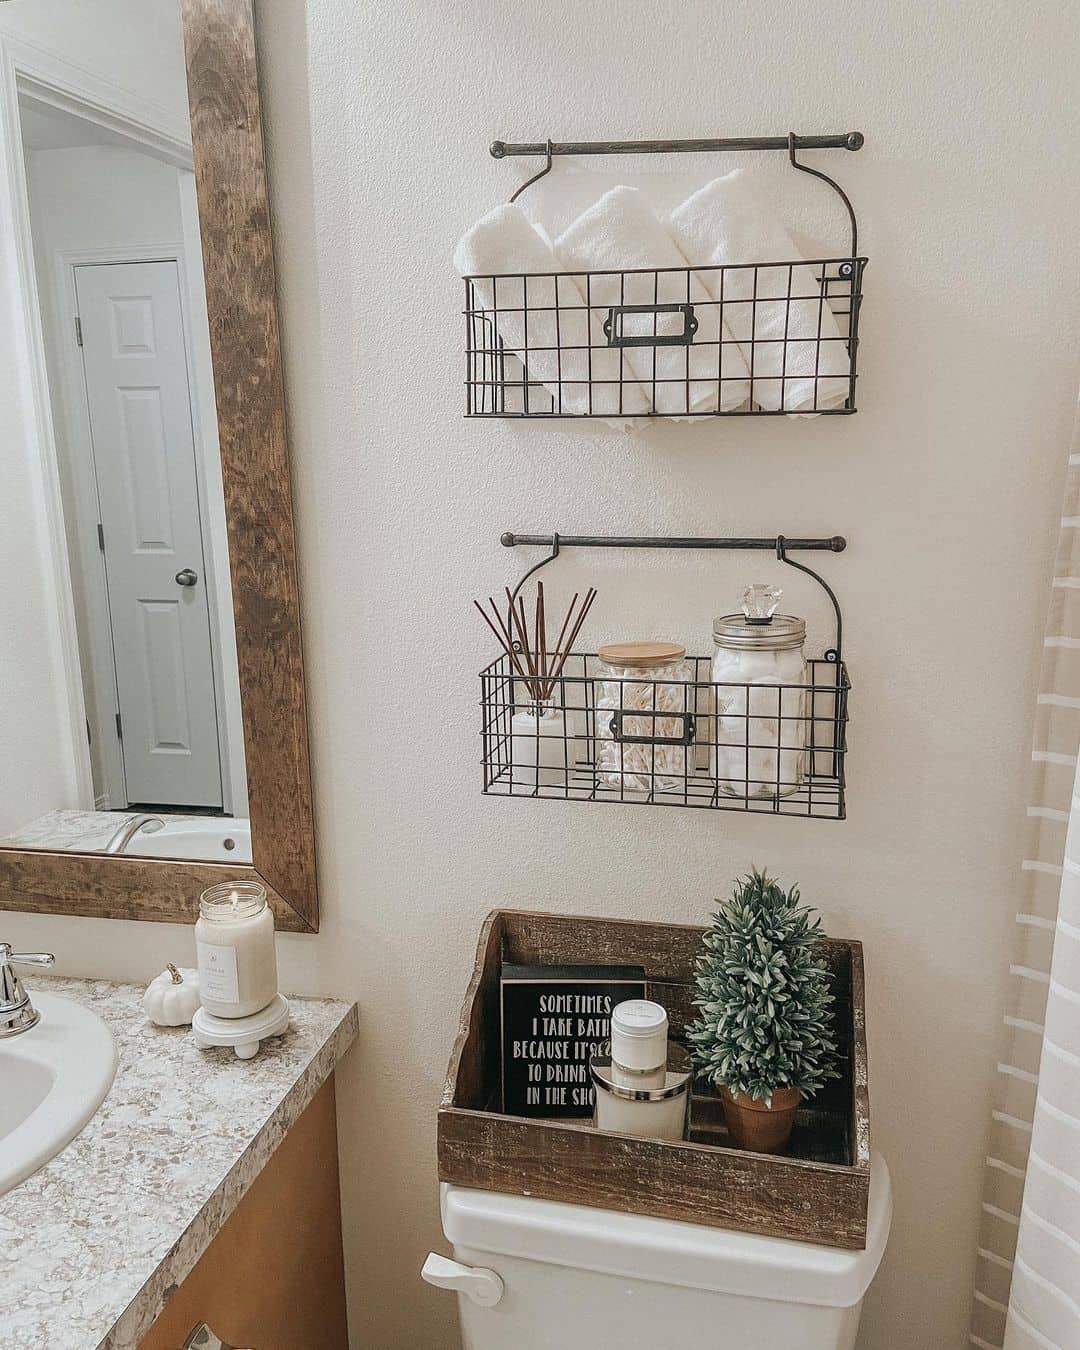 26 Clever Bathroom Organizer Ideas for Bathrooms Large and Small